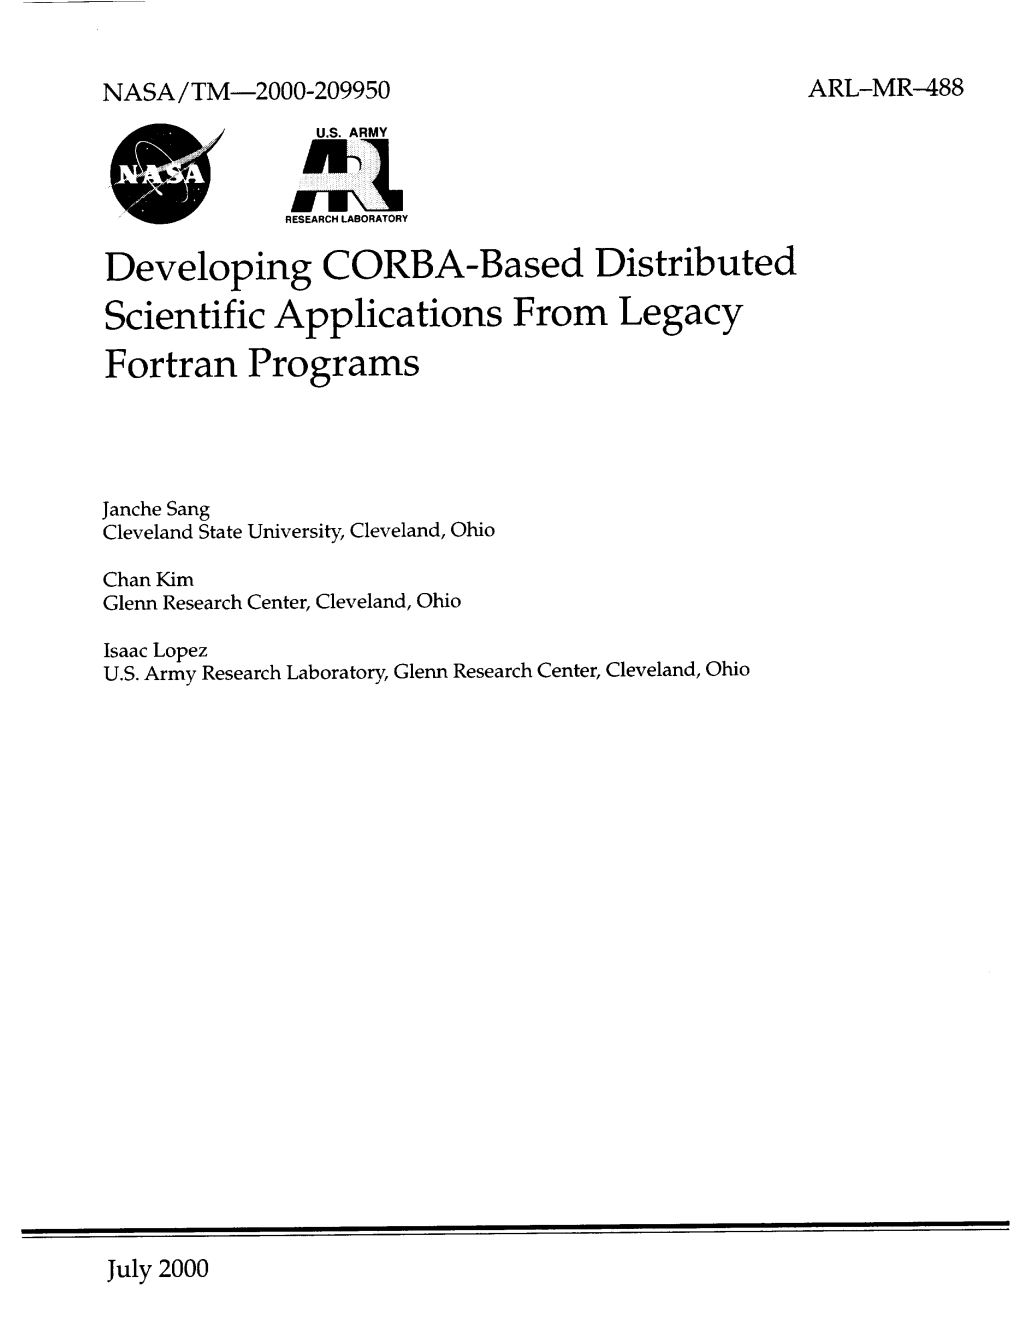 Developing CORBA-Based Distributed Scientific Applications from Legacy Fortran Programs